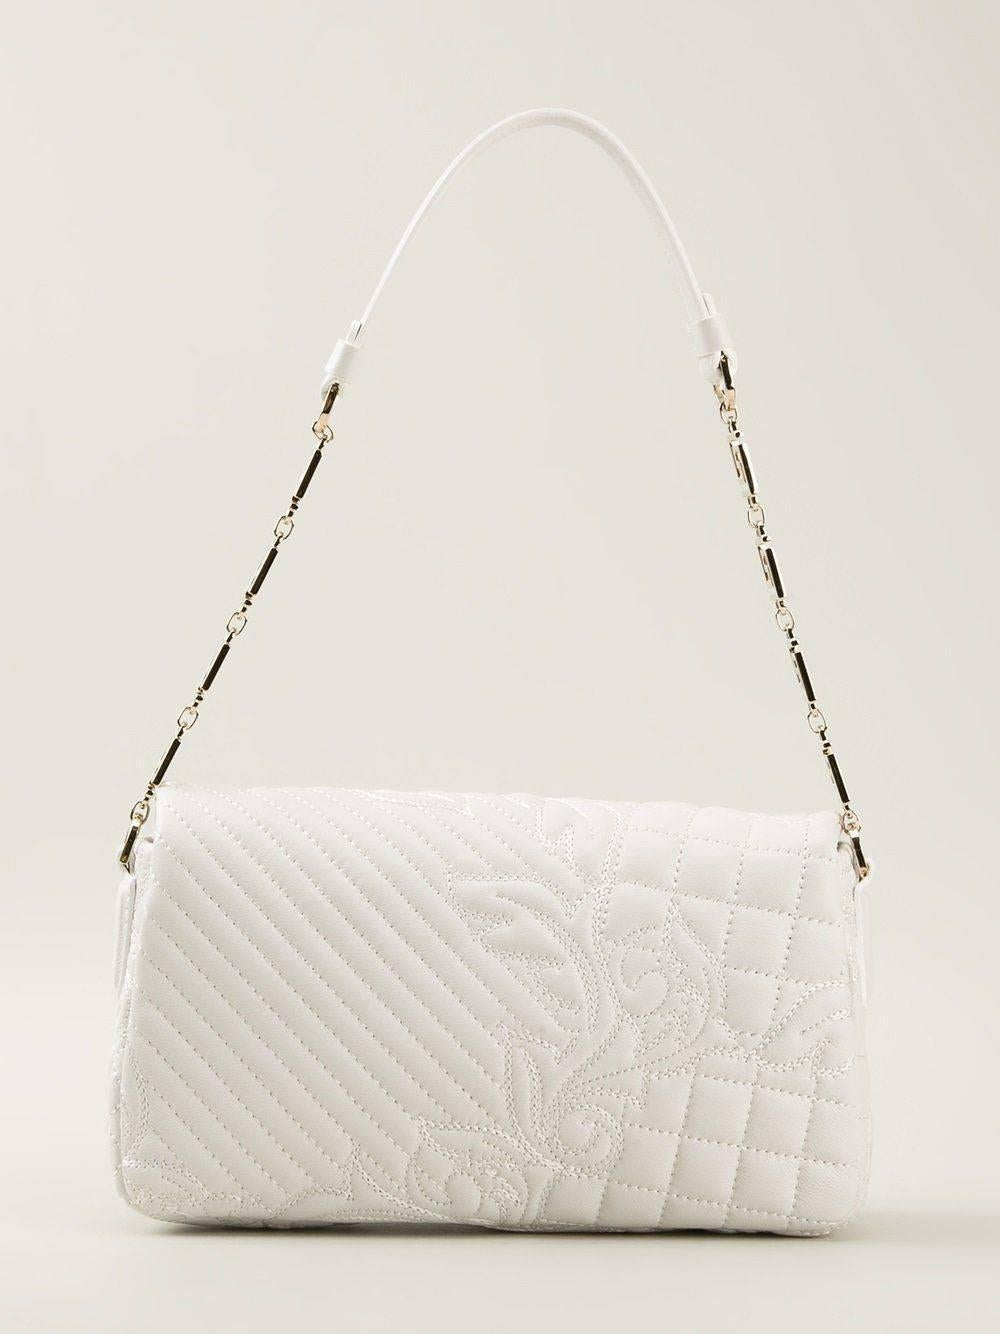 Gray New Versace White Vanitas Barocco Quilted Nappa Leather Handbag with Gold Medusa